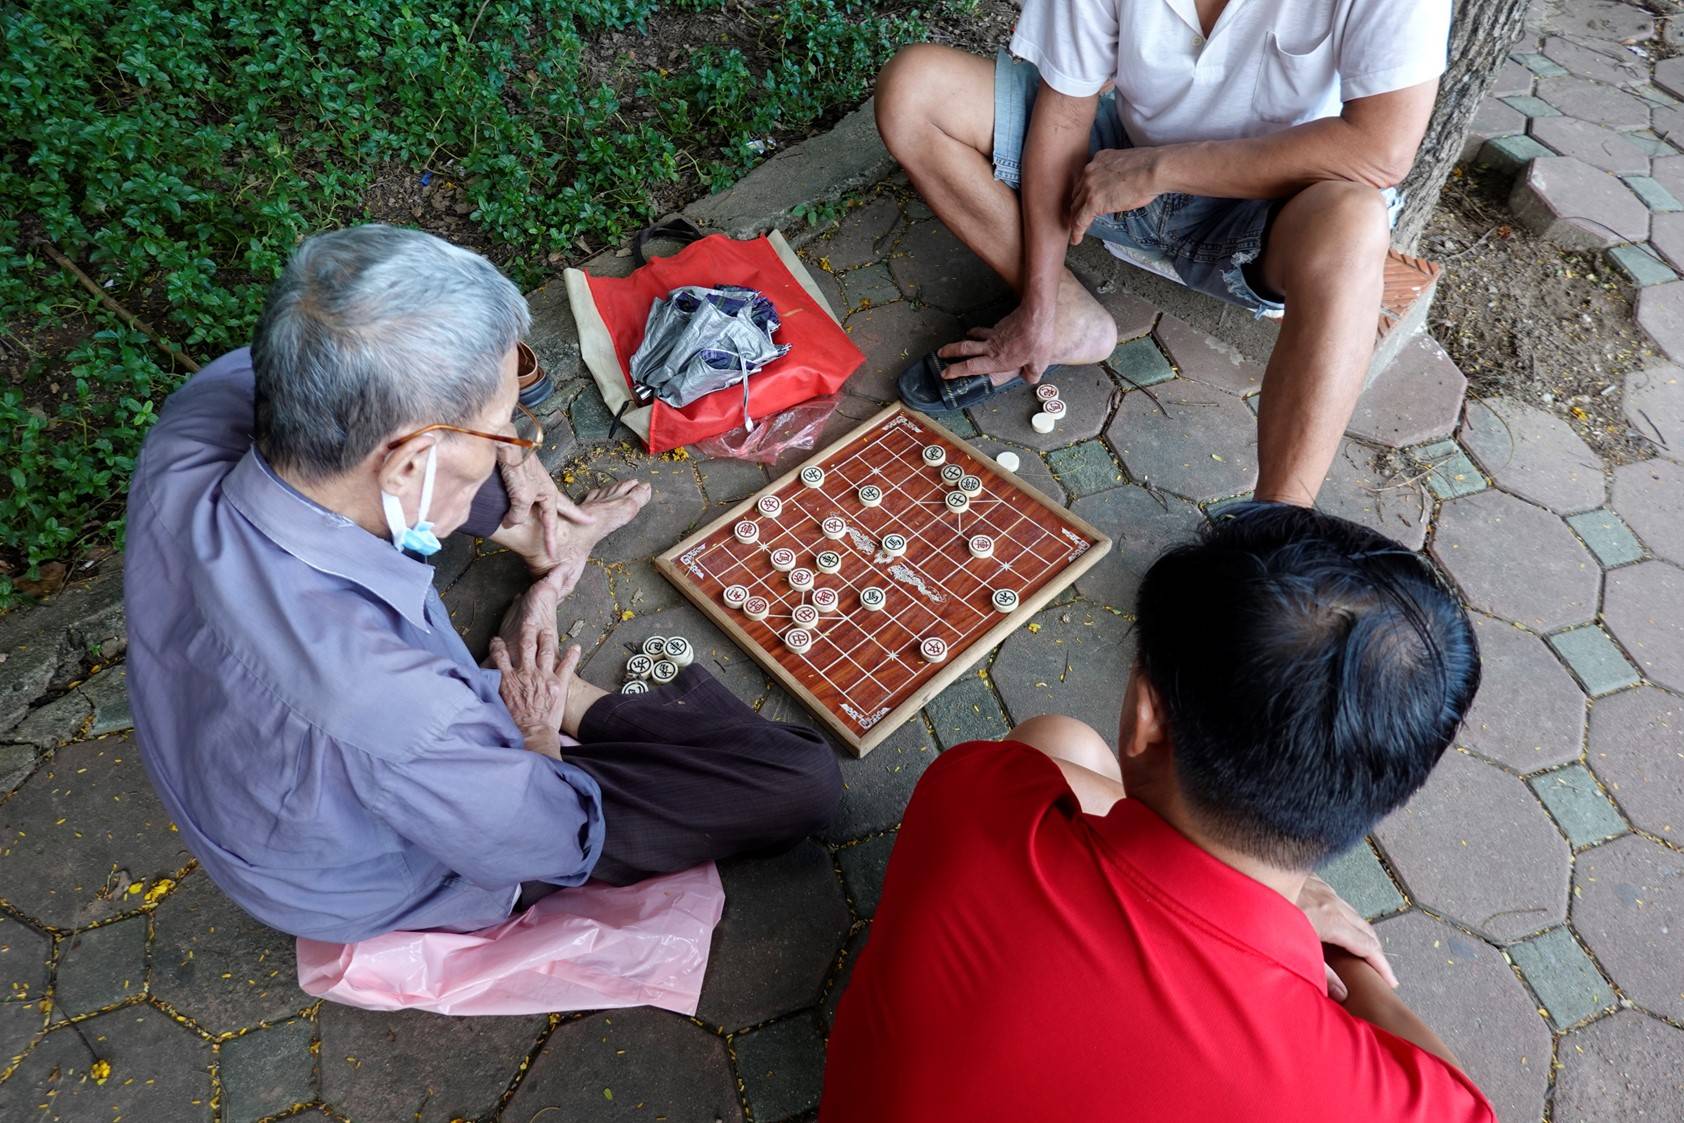 Three men sitting on paving stone walk. Two are playing a board game and the third man is watching them play.en watching board game in park